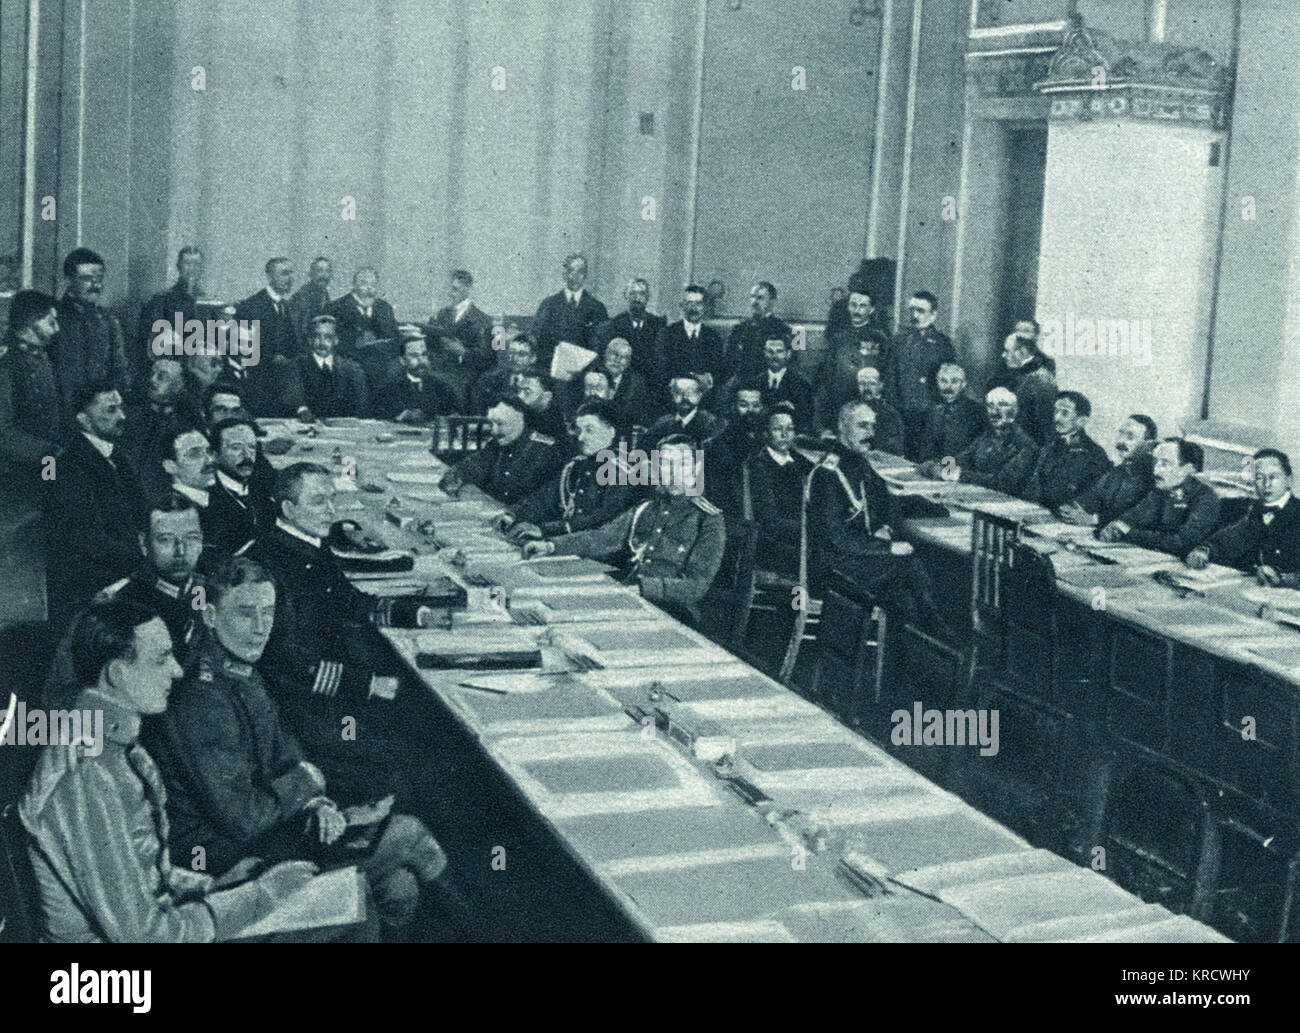 Russo-German talks in progress in the session hall at Brest- Litovsk, as the two sides negotiate over armistice terms Date: January 1918 Stock Photo